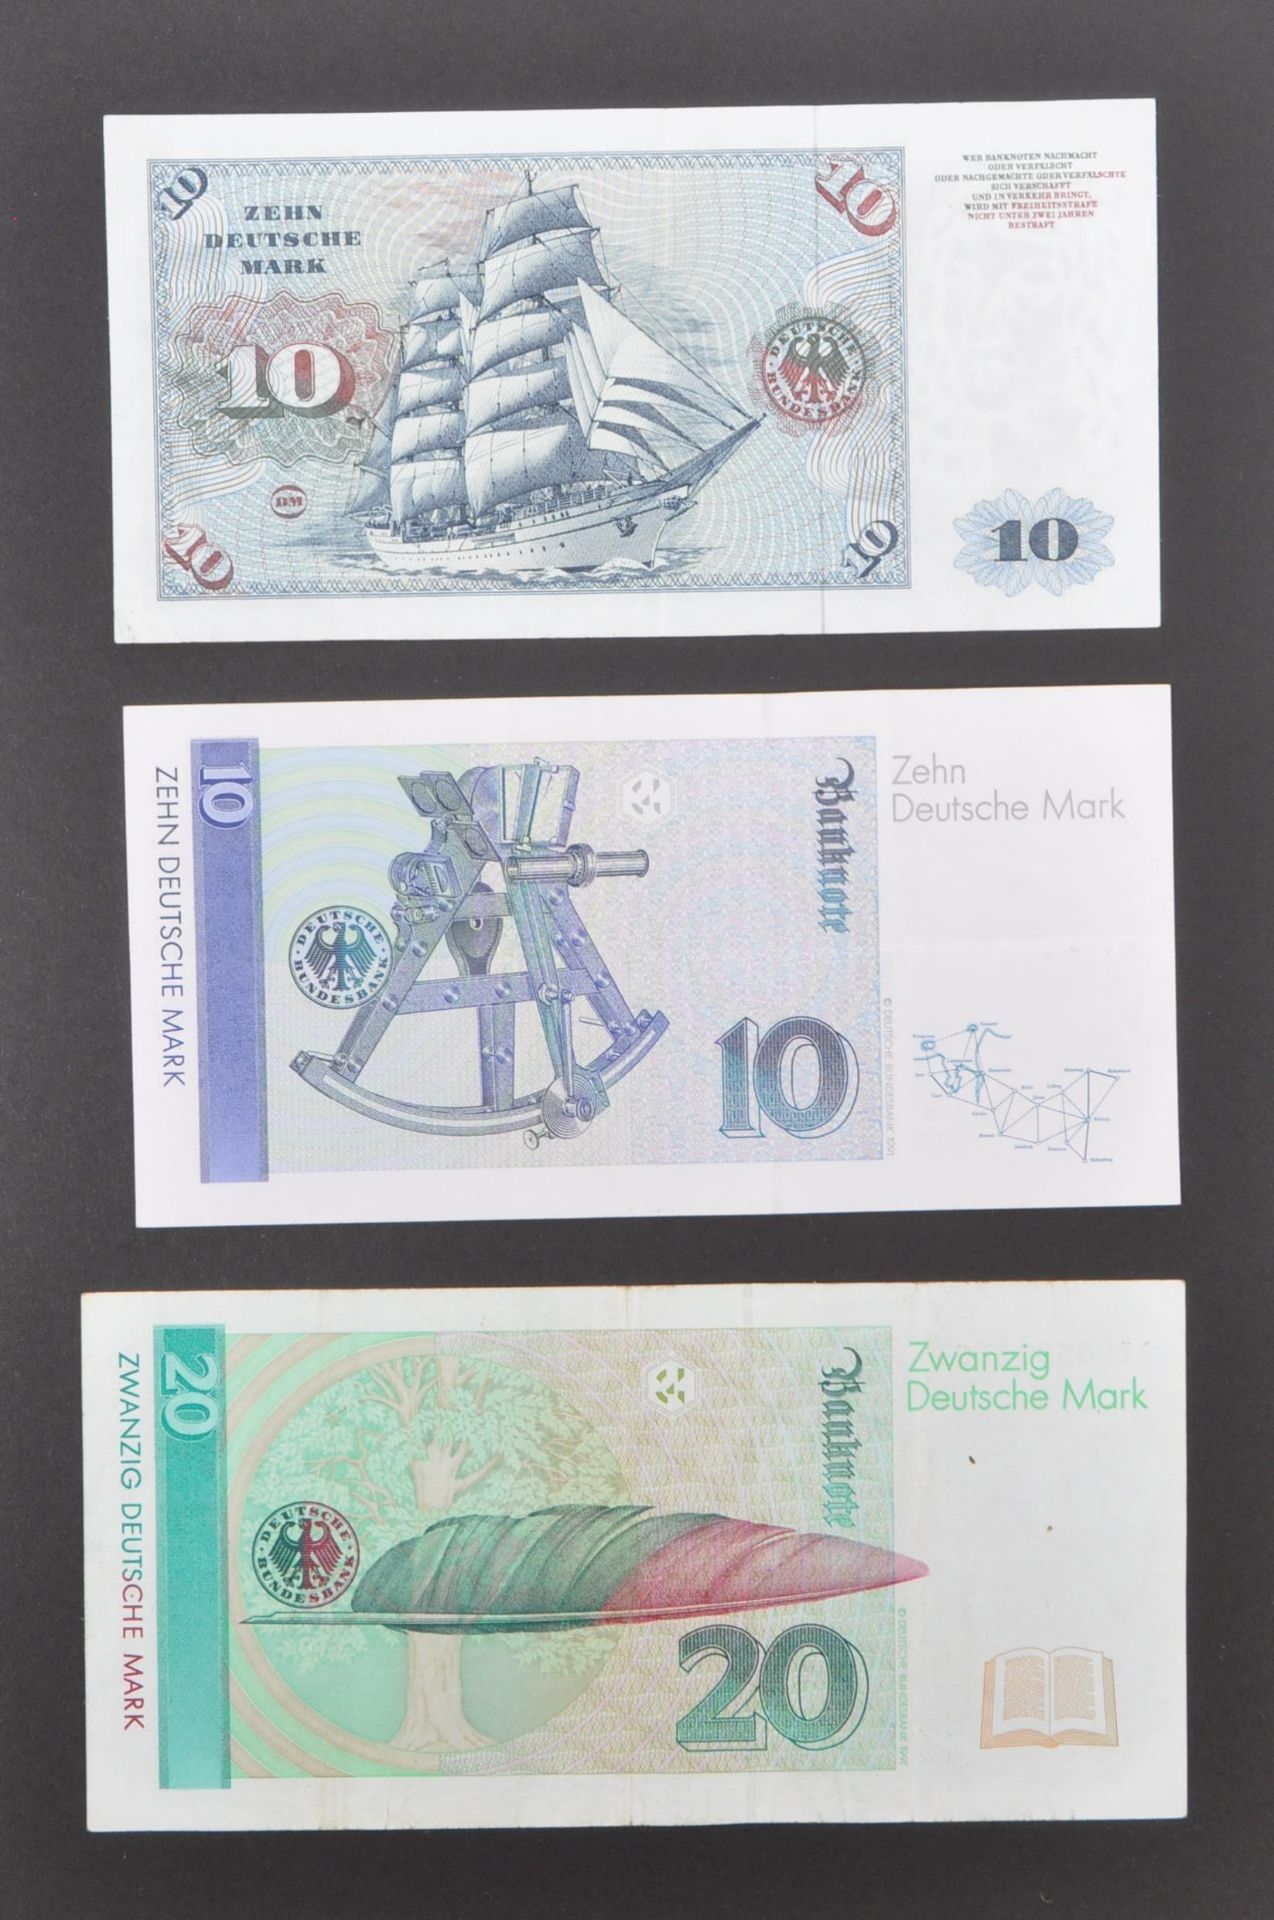 INTERNATIONAL MOSTLY UNCIRCULATED BANK NOTES - EUROPE - Image 4 of 30